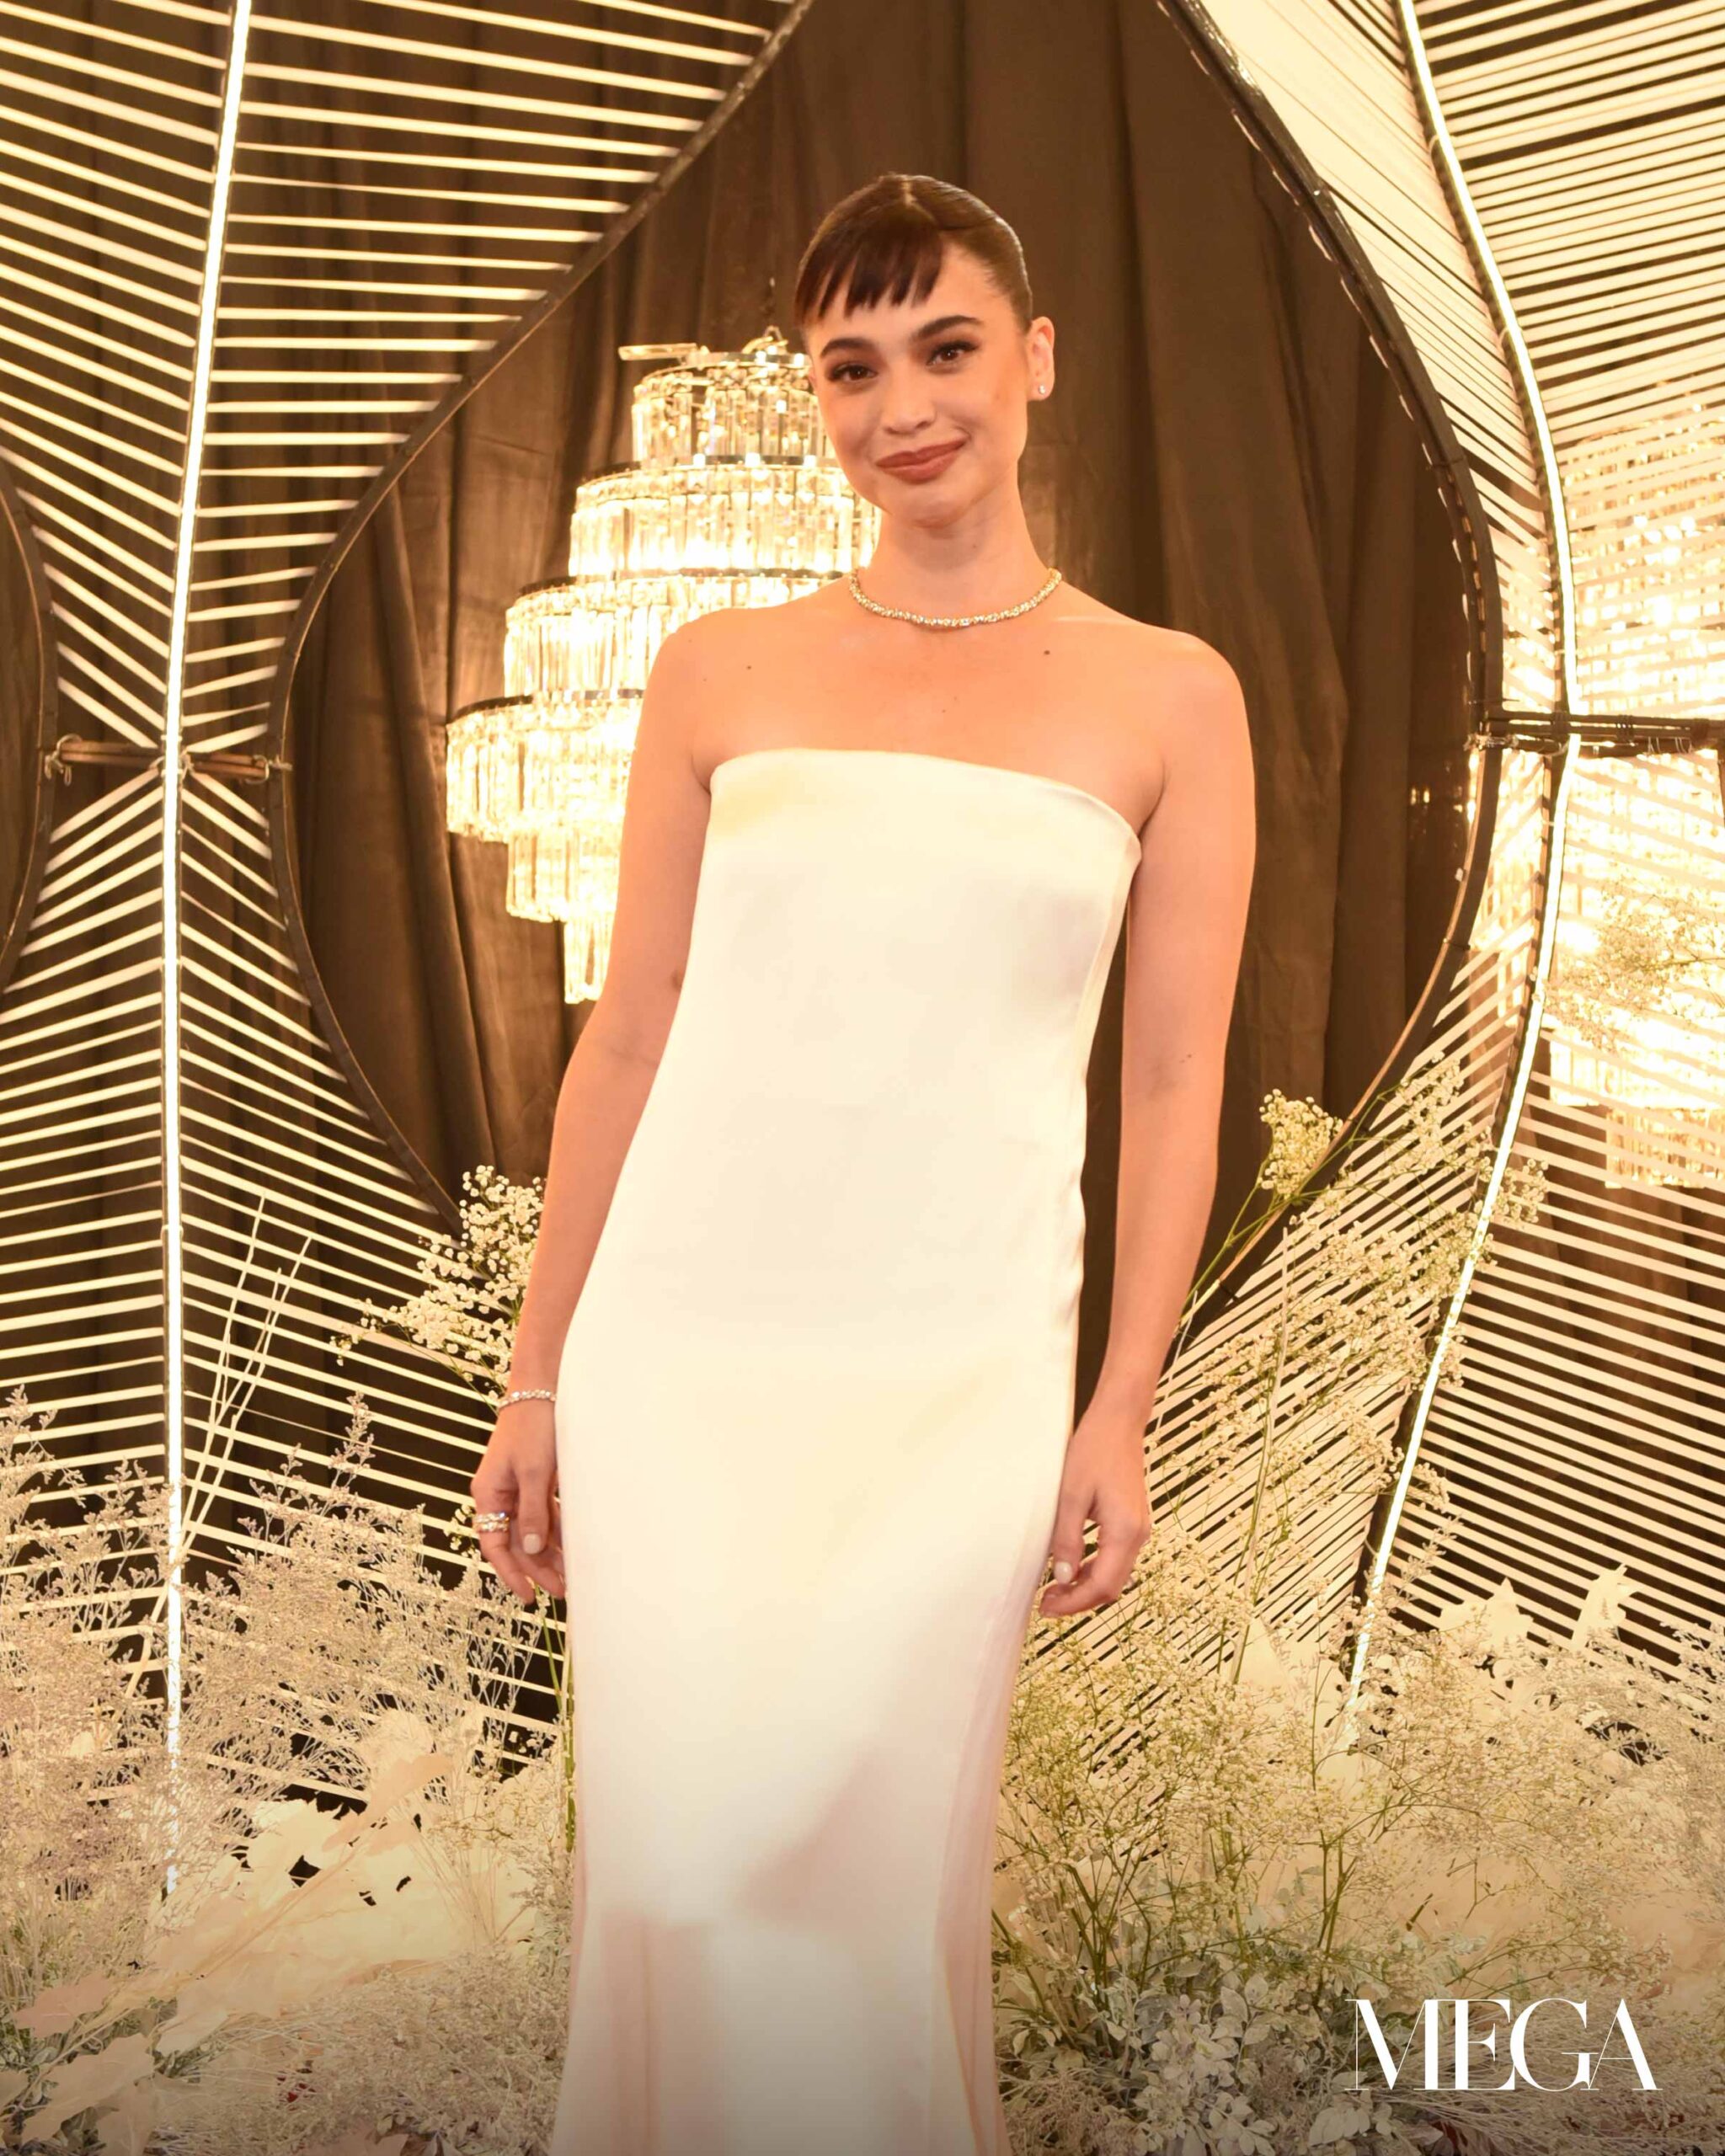 Anne Curtis looks ethereal in her white designer outfit